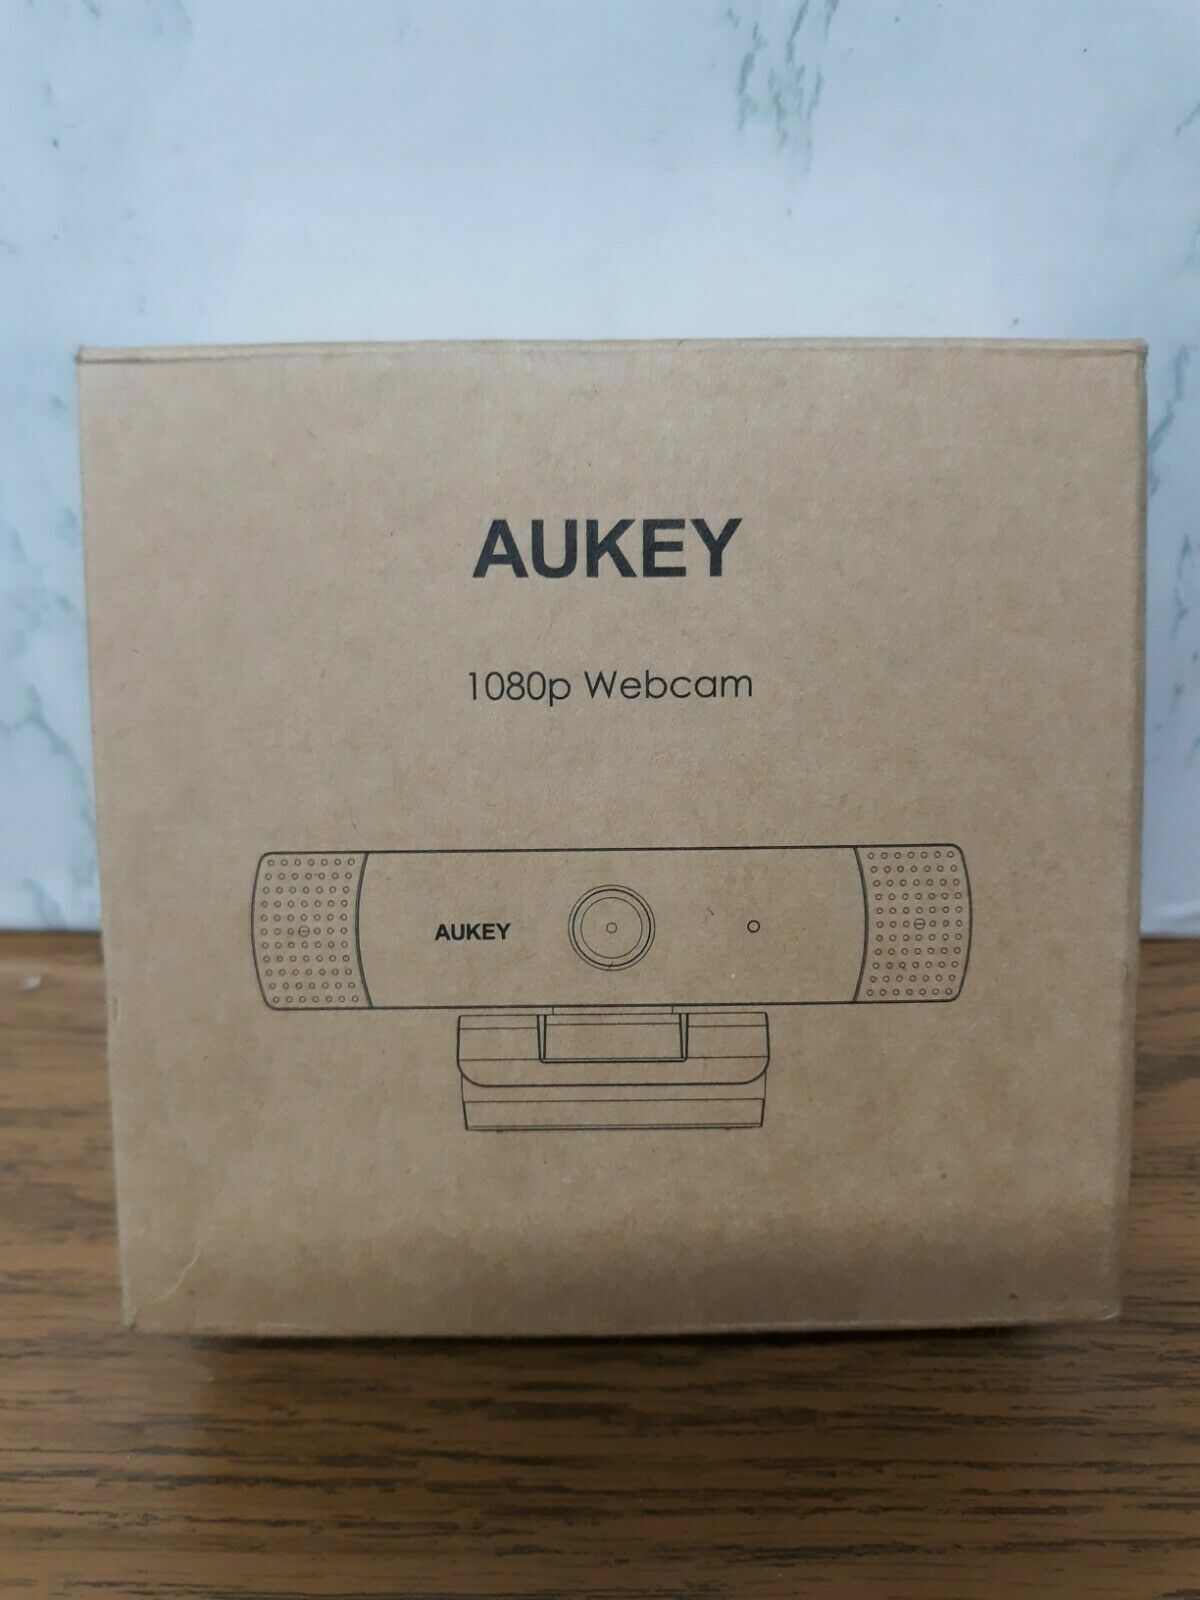 AUKEY Overview Full HD Video 1080p Webcam PC-LM1E